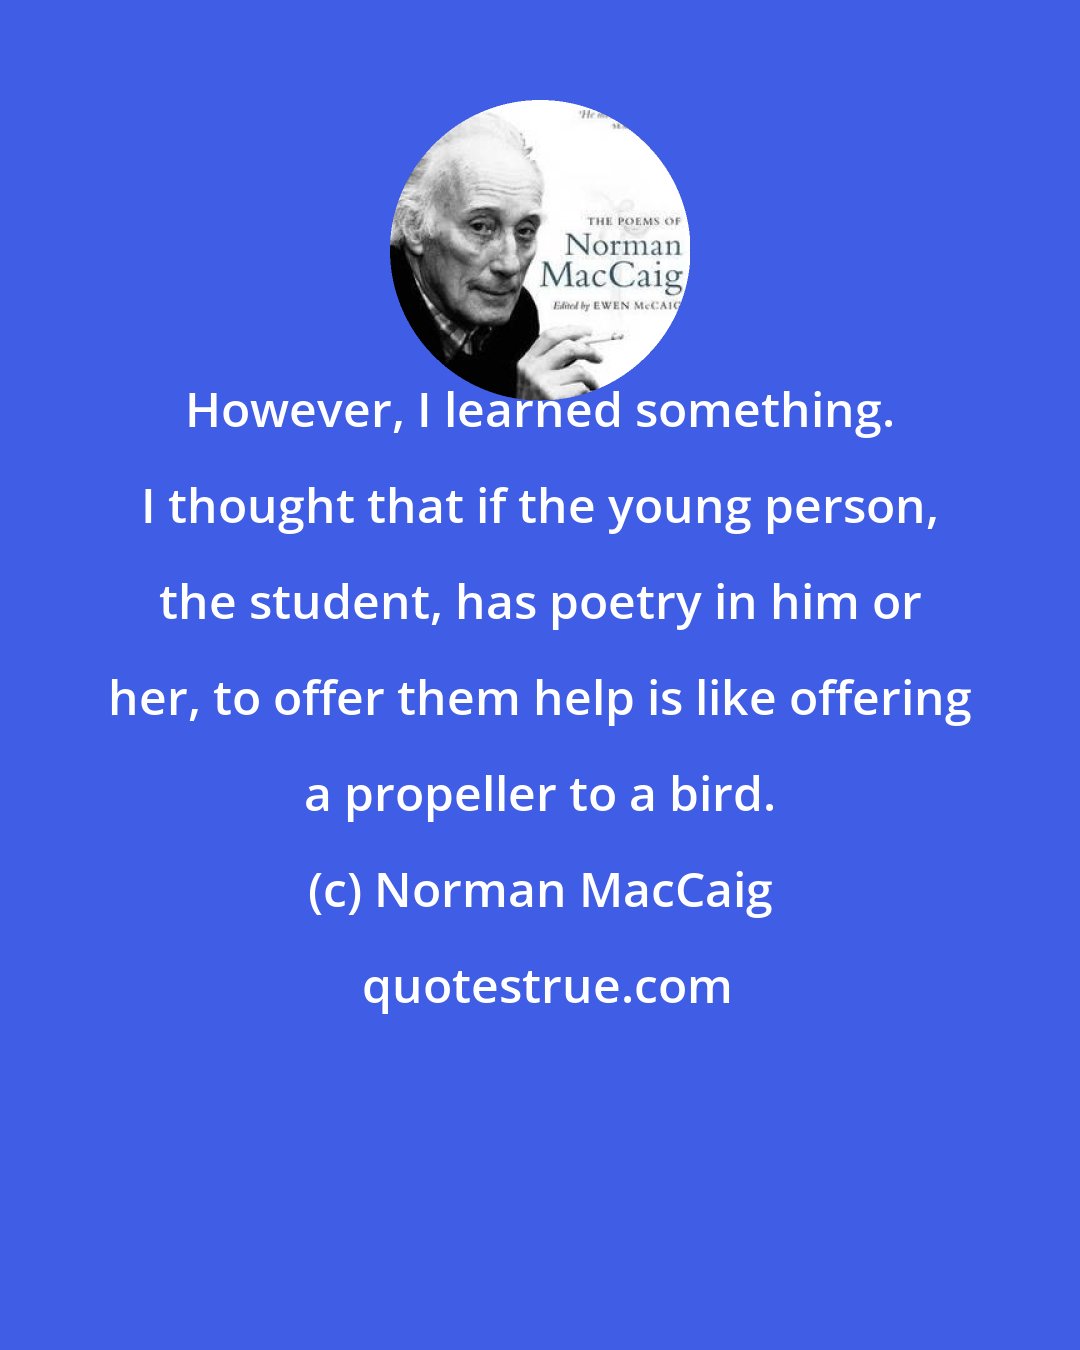 Norman MacCaig: However, I learned something. I thought that if the young person, the student, has poetry in him or her, to offer them help is like offering a propeller to a bird.